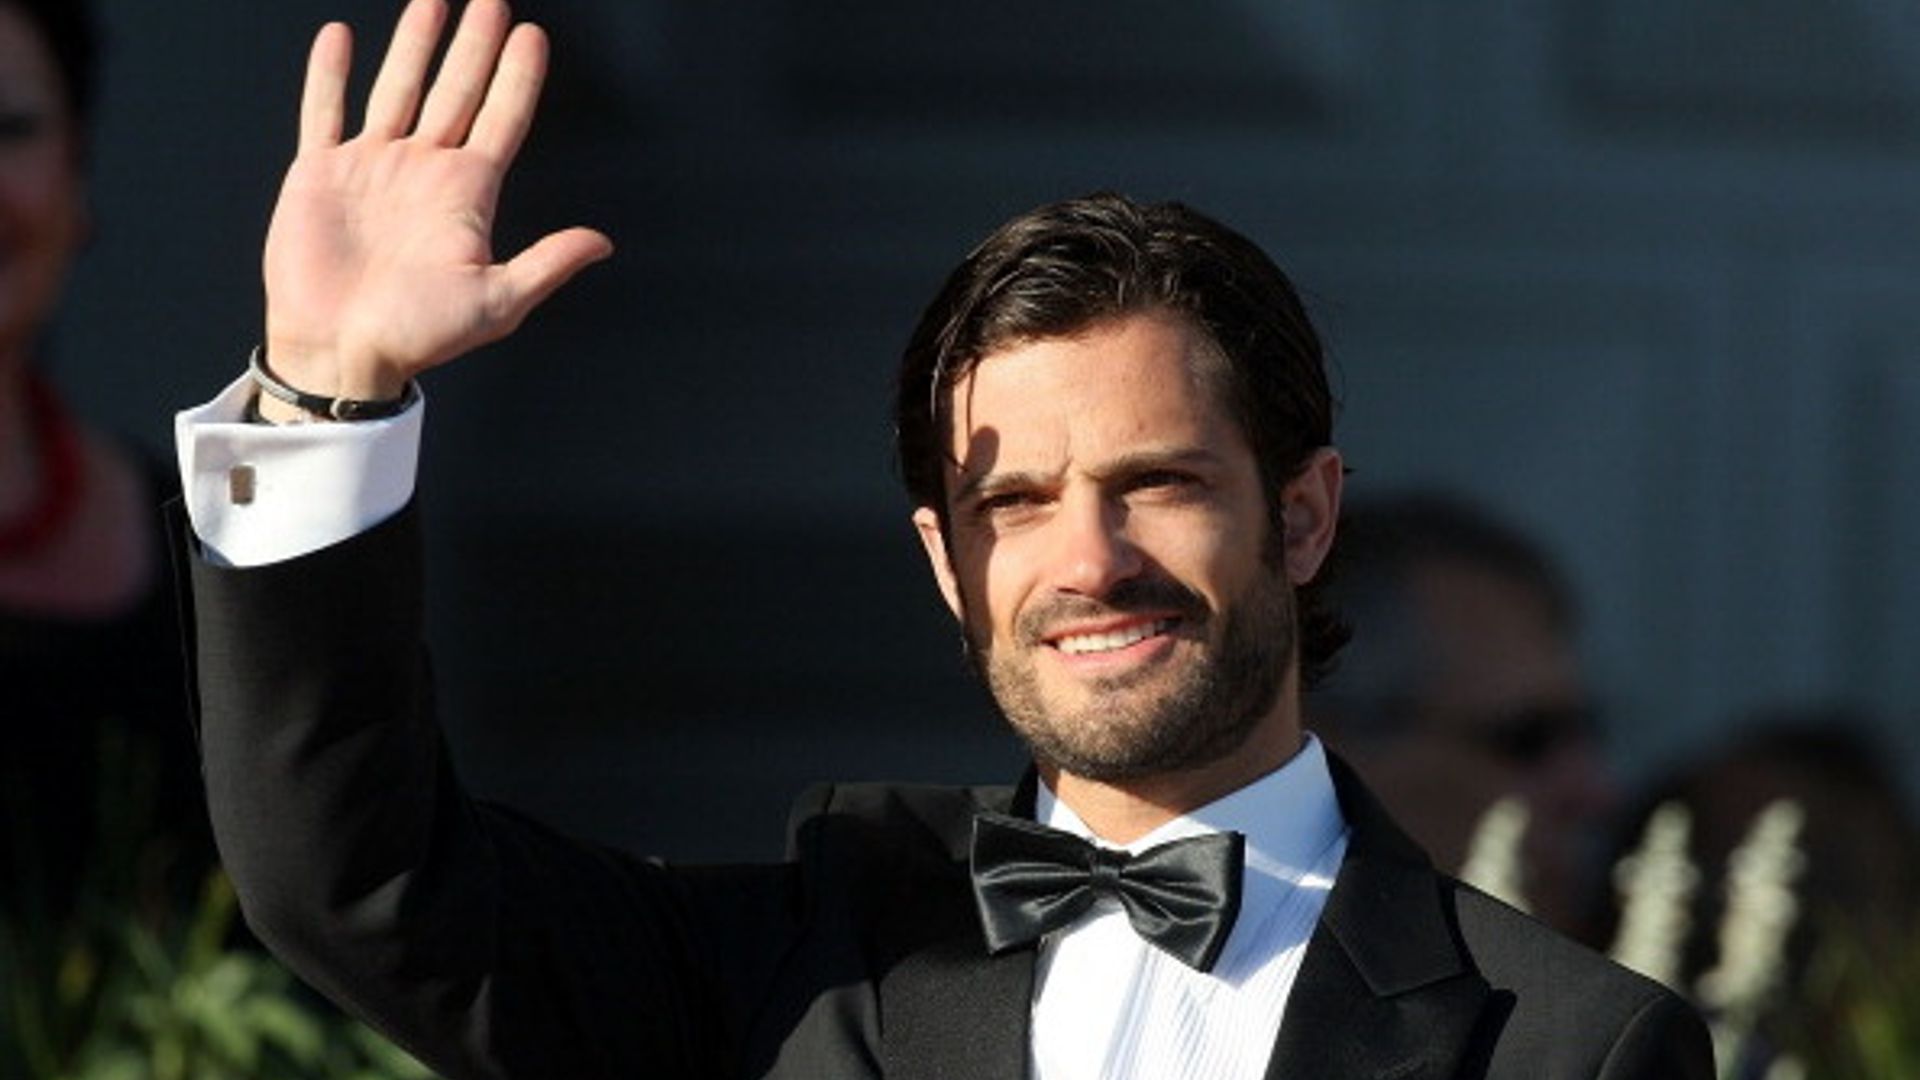 Prince Carl Philip: 'Nothing makes him sadder' than a dyslexic child being called 'stupid'